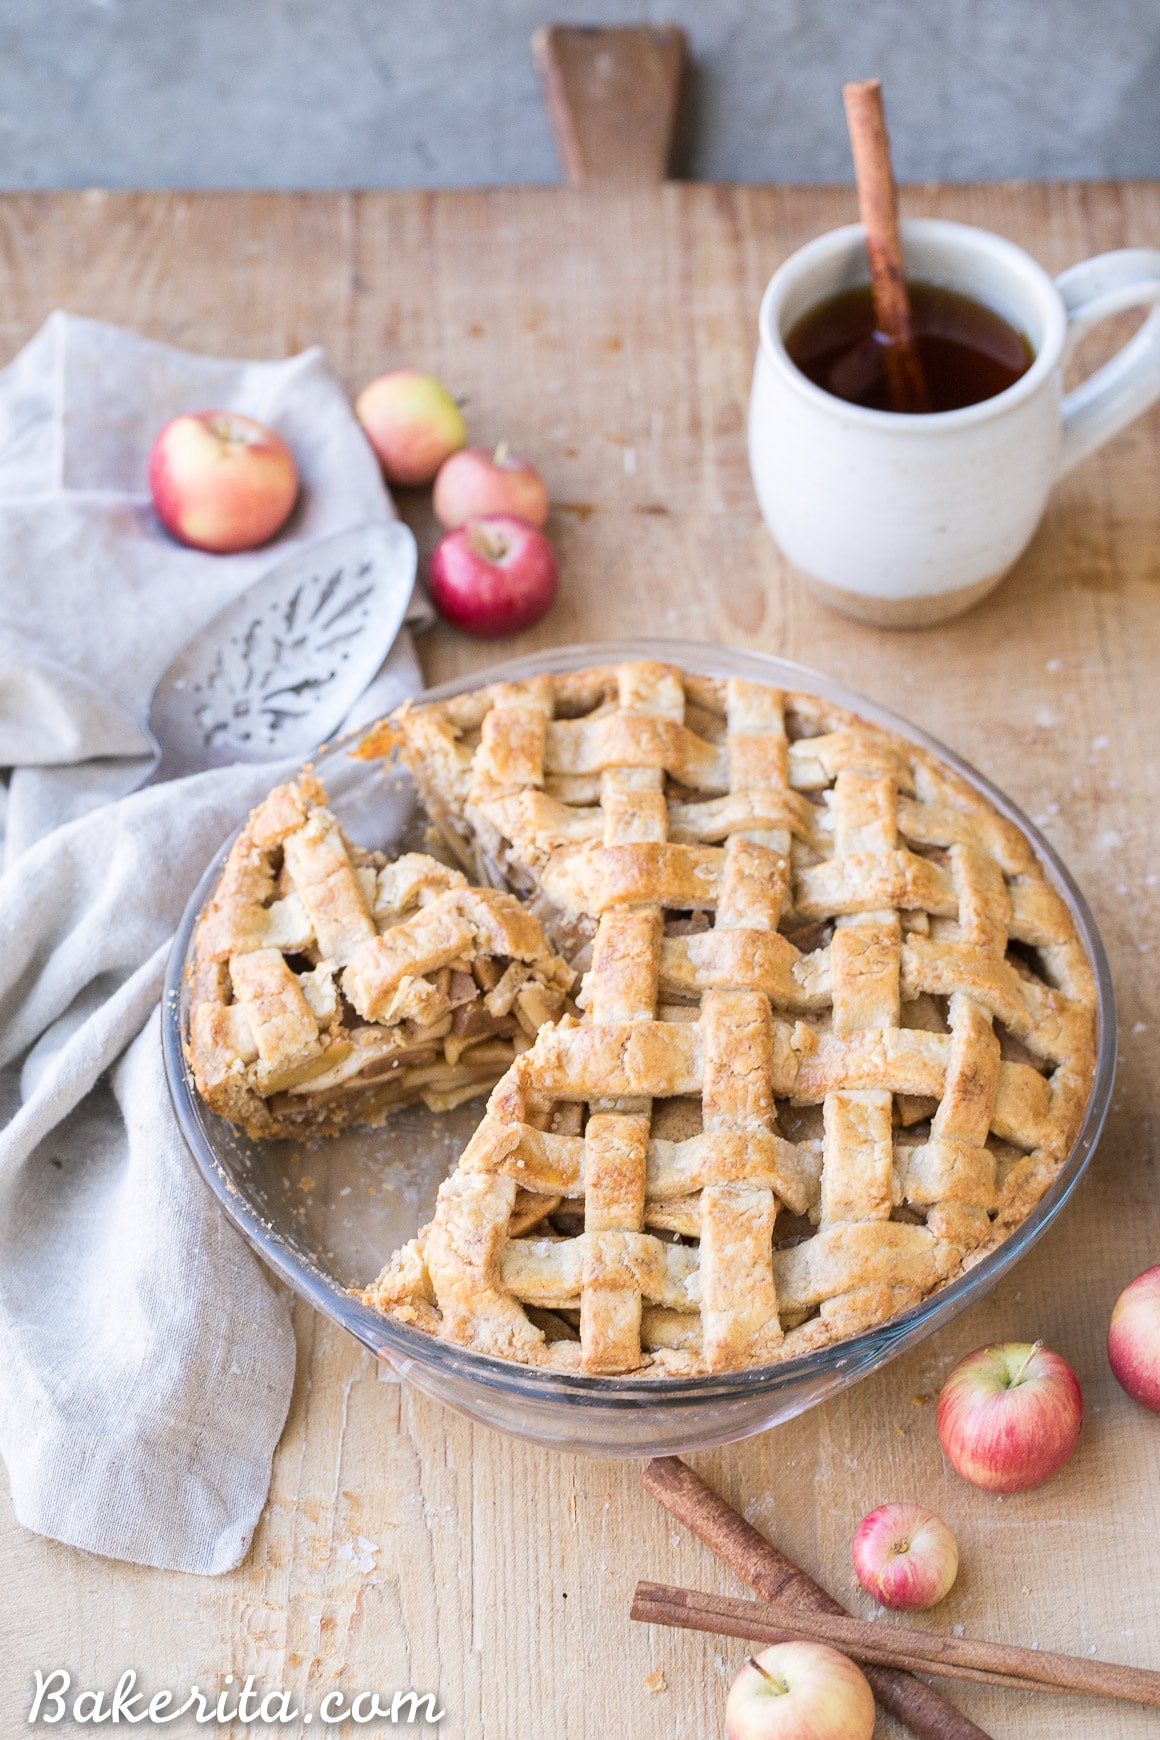 This Paleo Apple Pie has a flaky gluten-free lattice crust with a delicious spiced apple filling! Your holiday dessert table isn't complete without apple pie, and this healthier refined sugar free recipe will satisfy any apple pie lover.